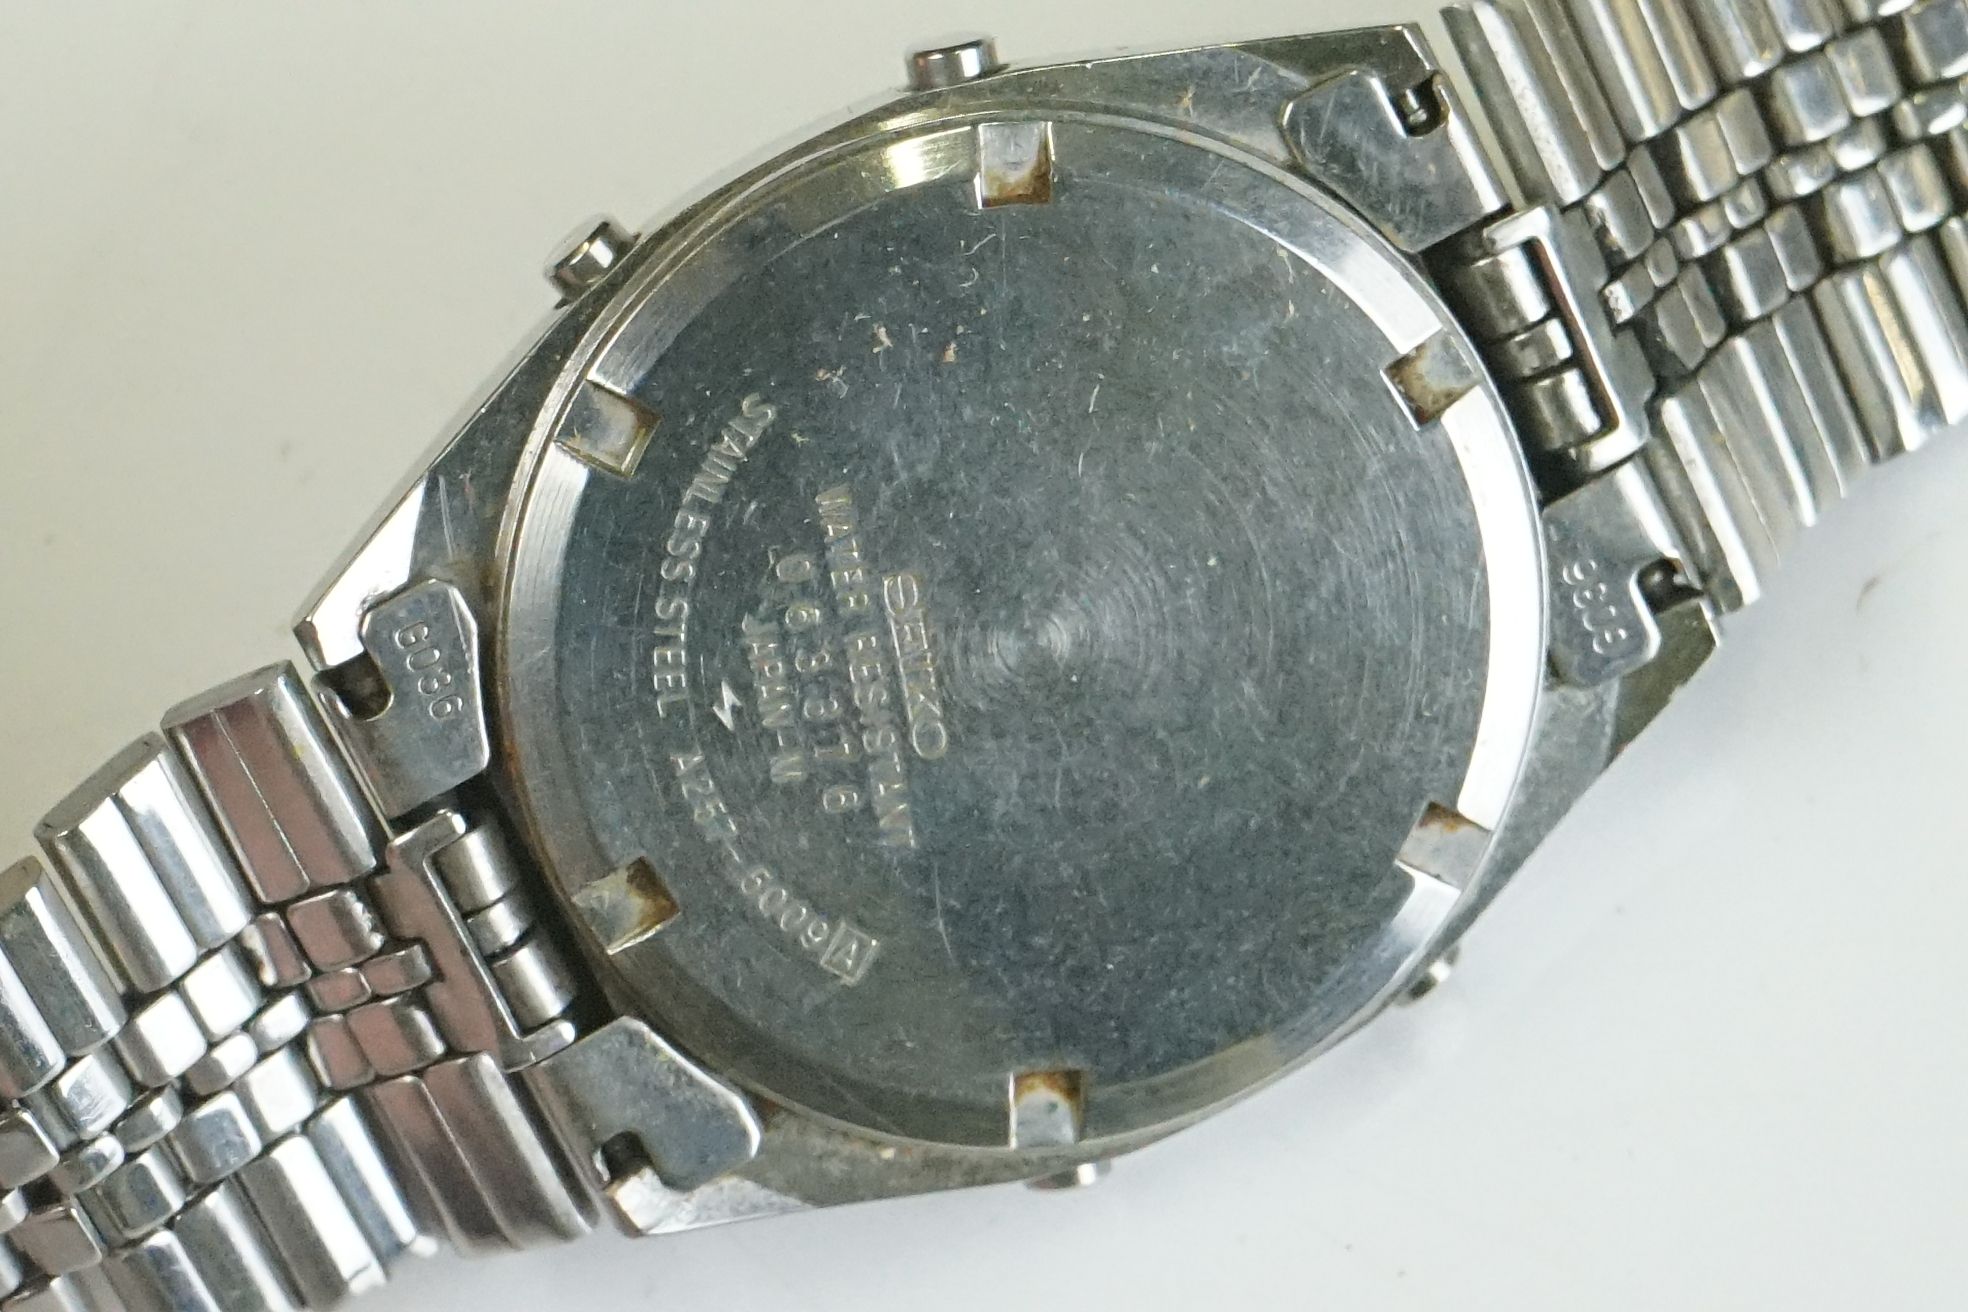 Collection of LCD Watches including Seiko, Casio, Lambda, etc - Image 12 of 14